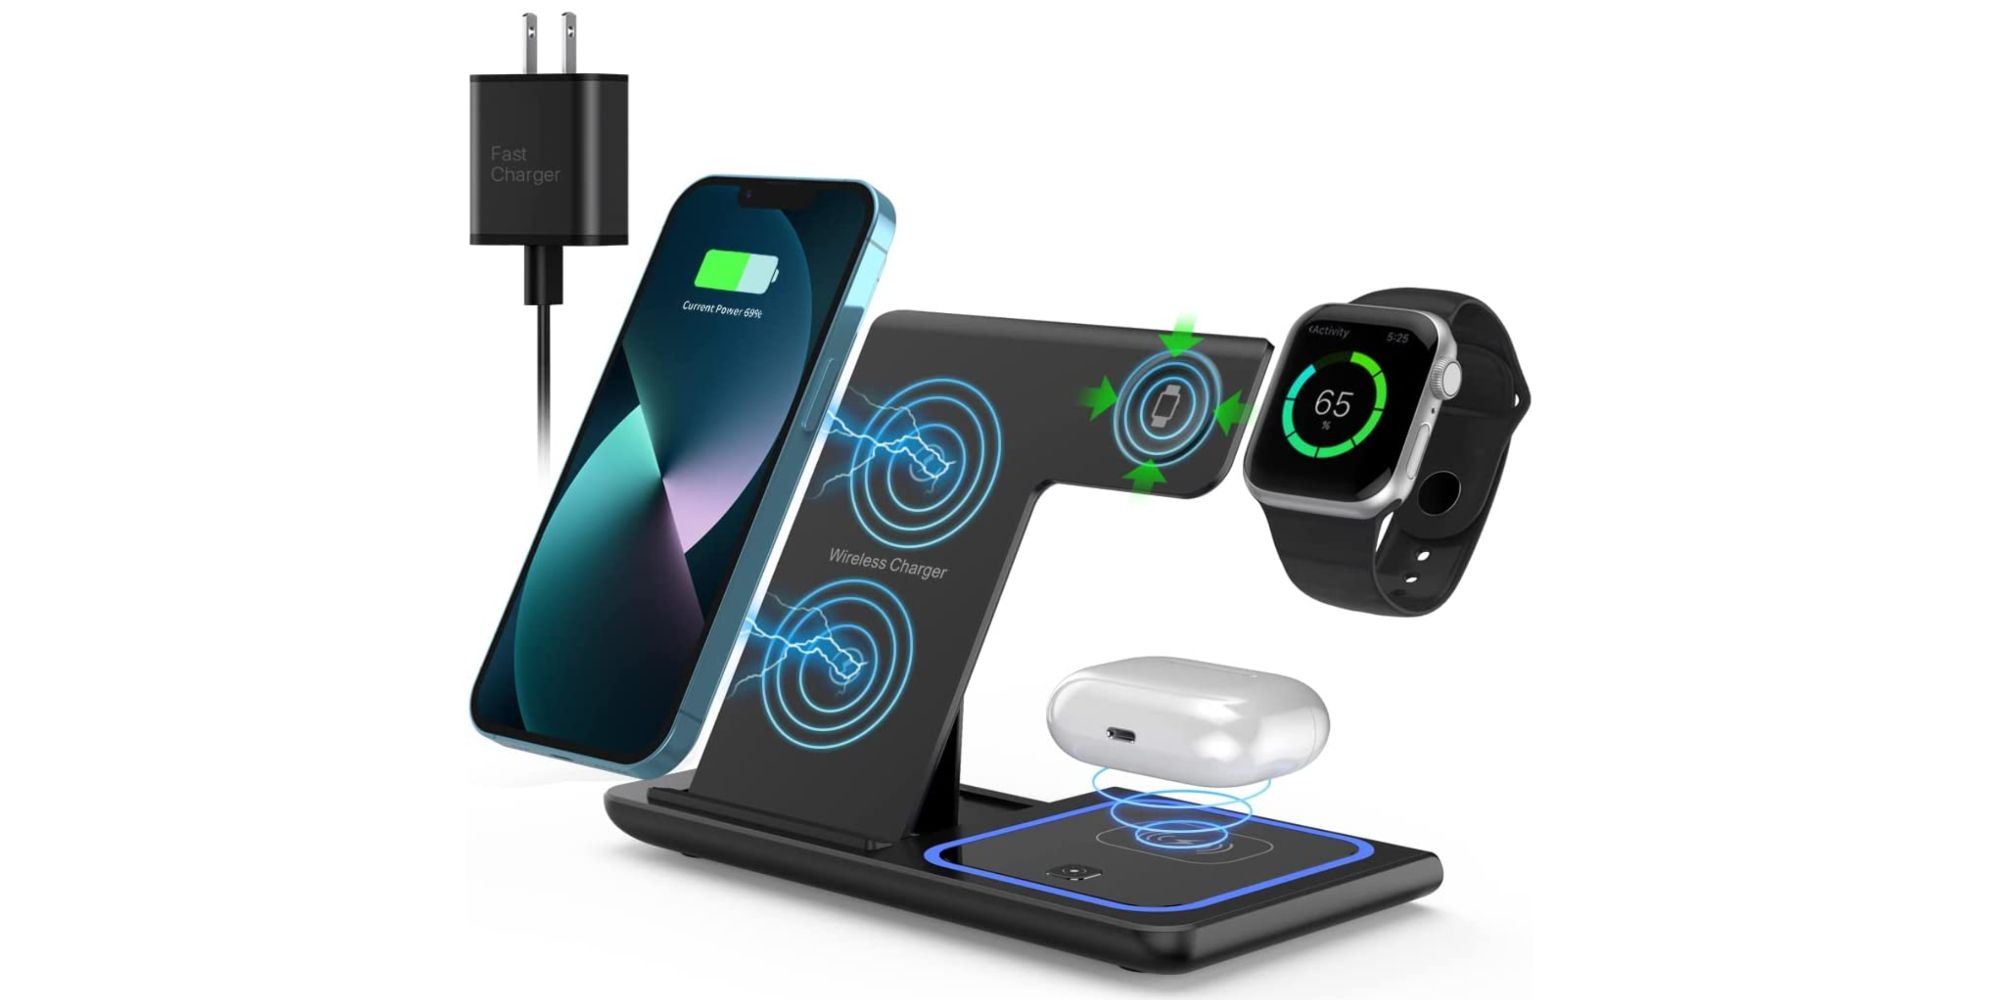 Anylinco 3-in-1 wireless charger from Amazon